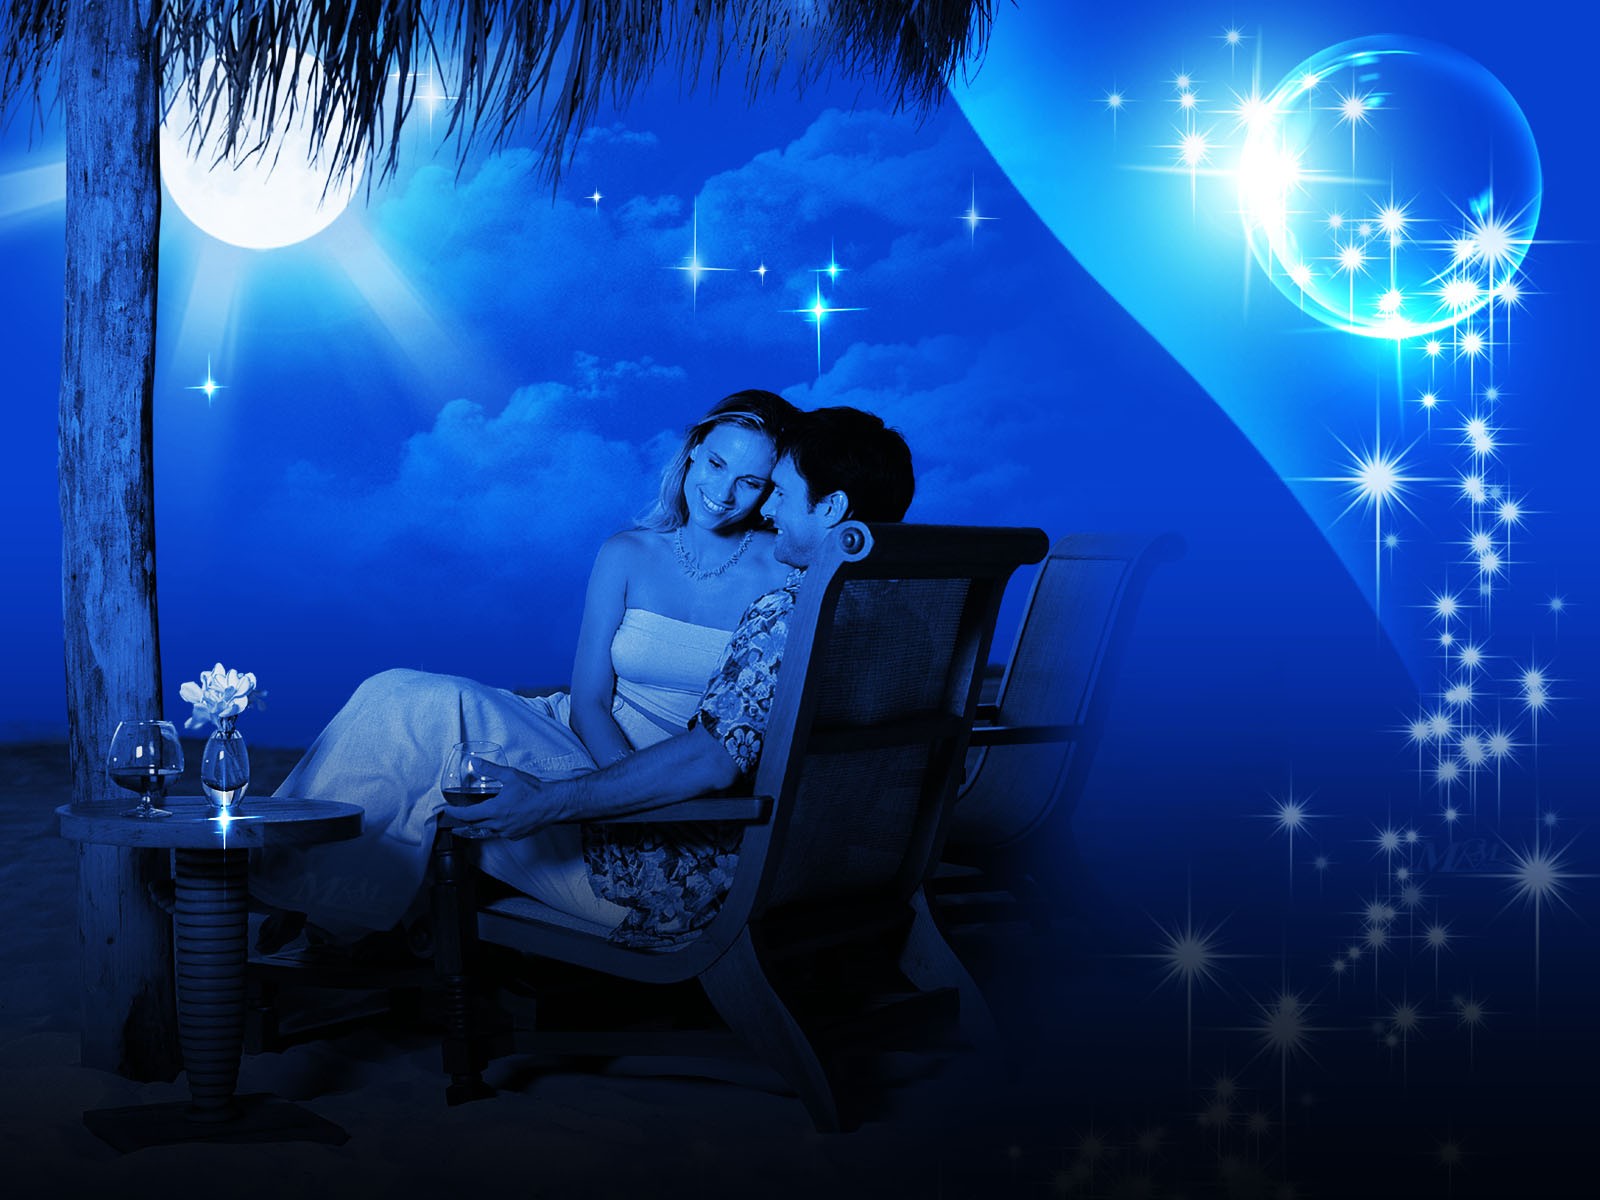 Romantic Love Wallpapers for Valentines Day Wallpaper